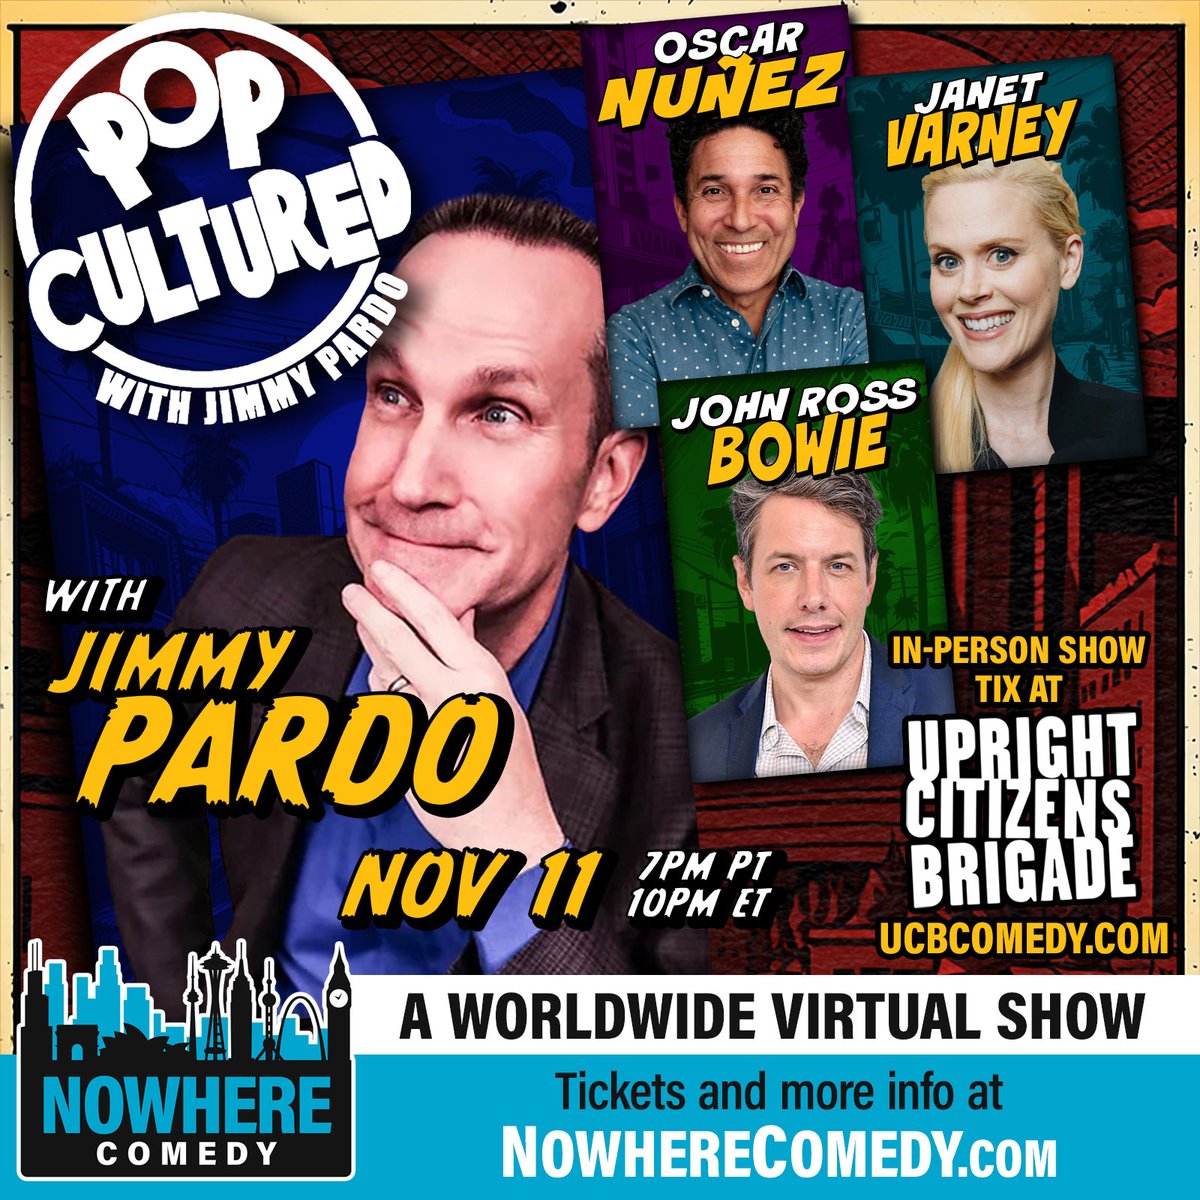 Pop Cultured with @jimmypardo, a night of comedy with #OscarNunez, #JohnRossBowie, @janetvarney & @blainecapatch! It's a night of laughter & fun you won't want to miss: NowhereComedy.com